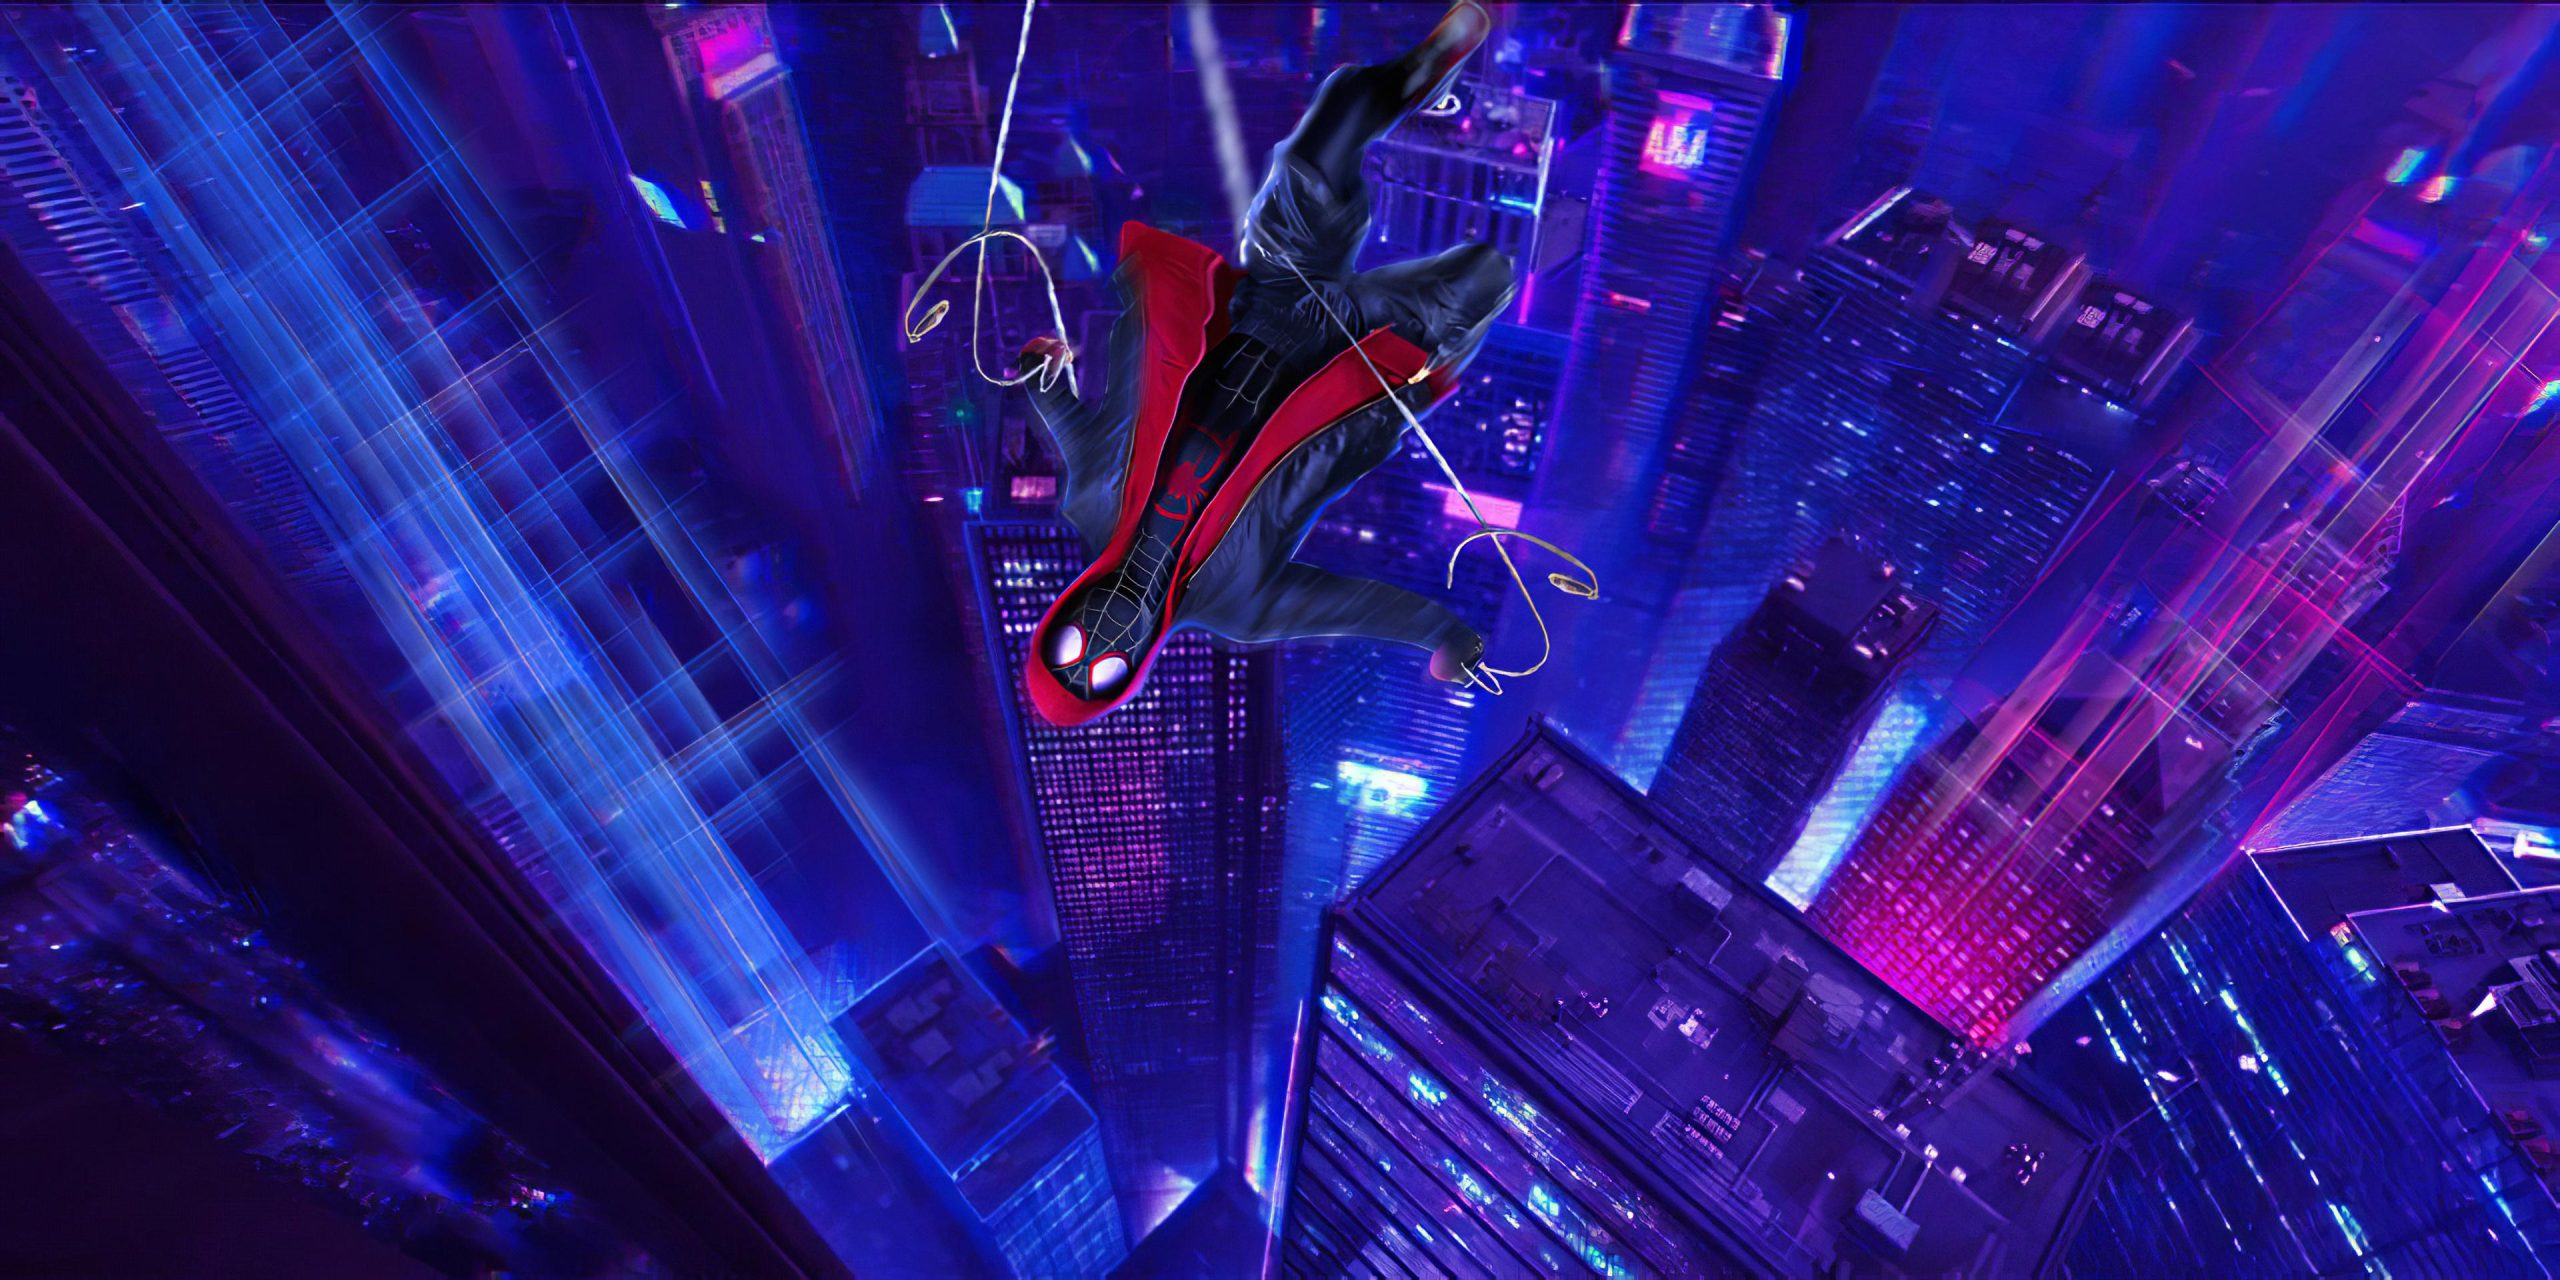 Miles Morales Neon Hd Wallpapers For Pc, Miles Morales Neon, Movies